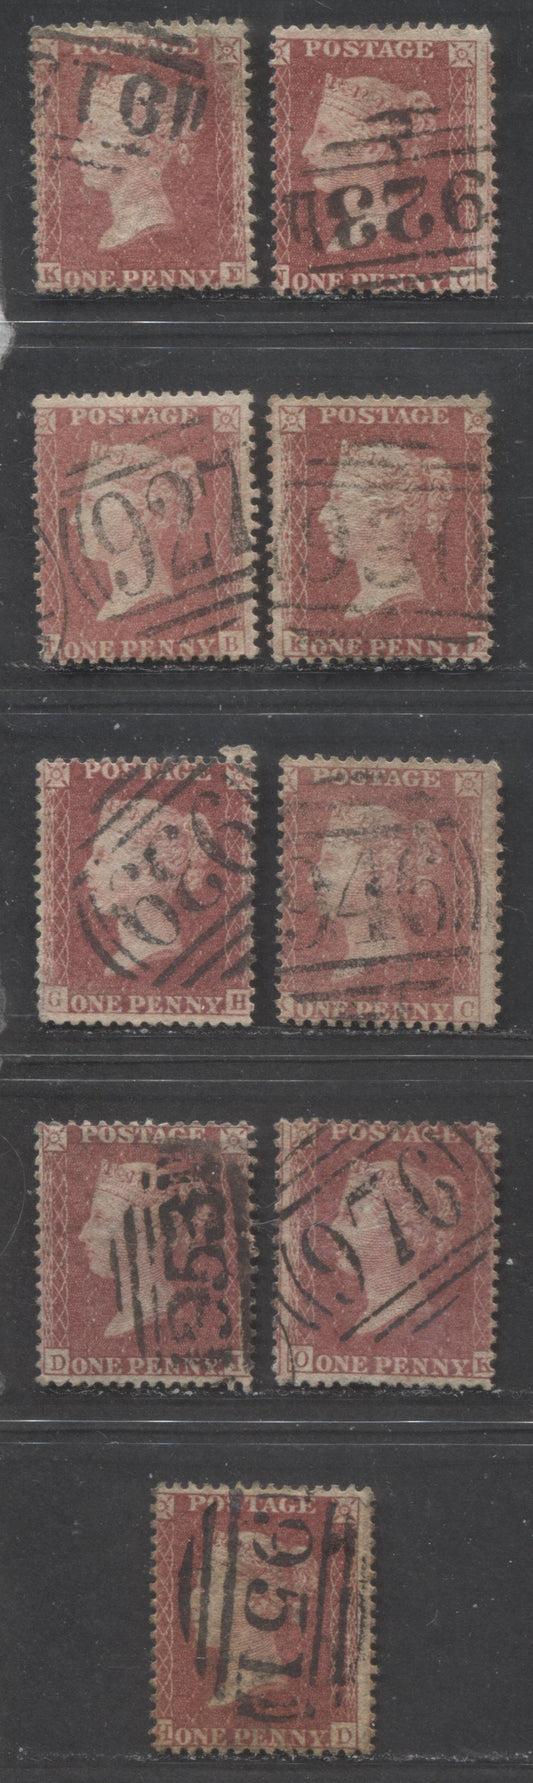 Lot  477 Great Britain - Barred Numeral Cancels For England & Wales: 900-999 SC#20 1d Rose Red & Deep Rose Red 1857-1863 1d Red Stars, Large Crown, White Paper, Perf. 14 Issue, #915/#976, 9 Good & VG Used Singles, Estimated Value $50